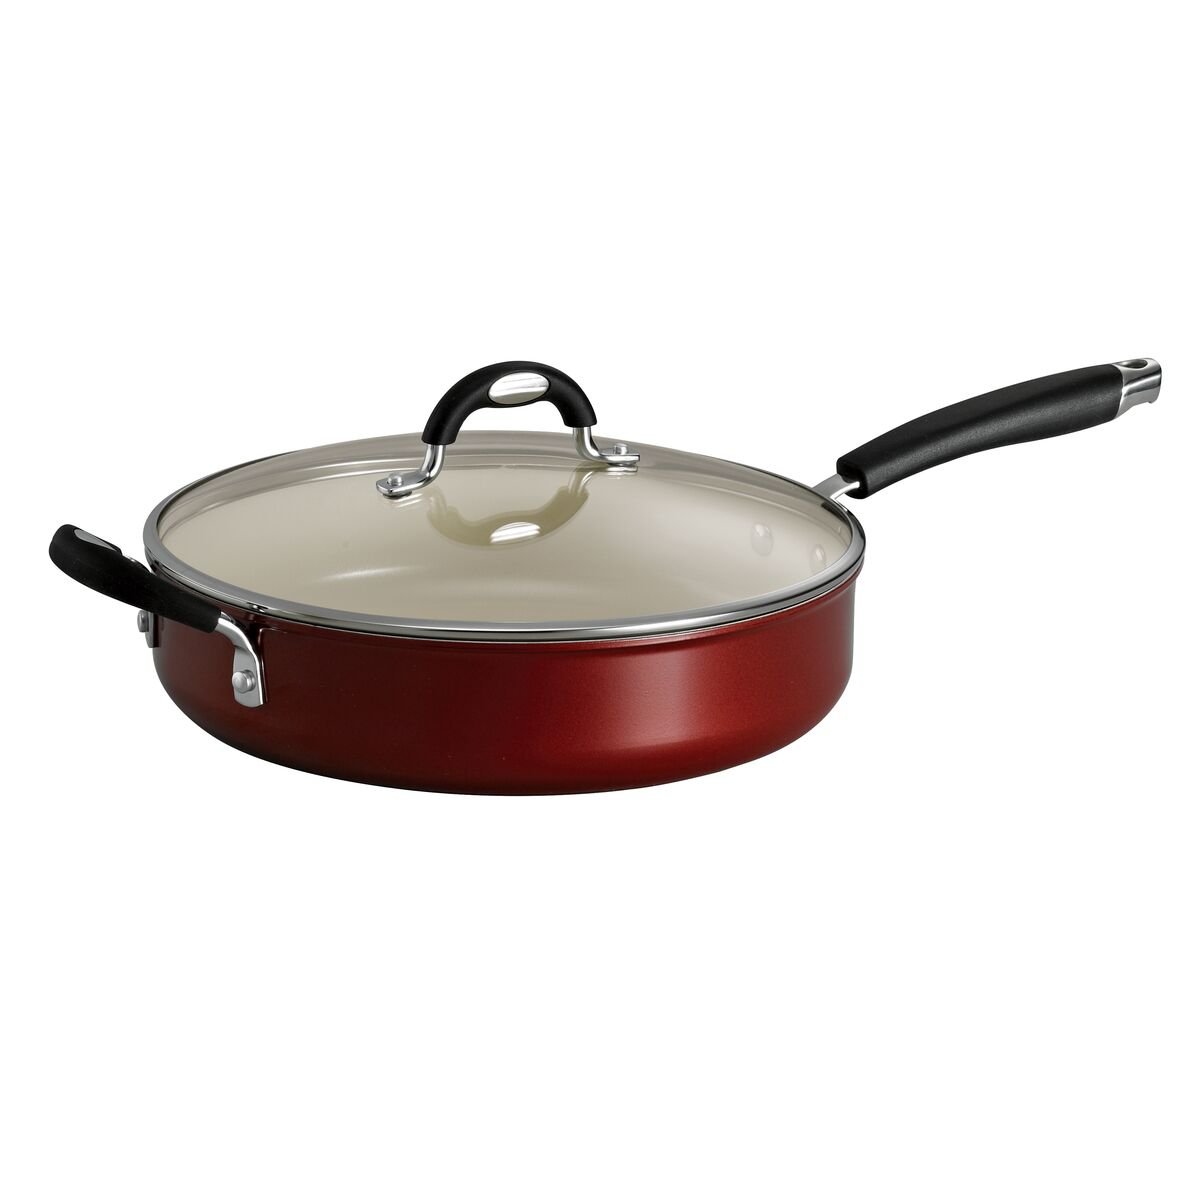 Tramontina Style Ceramica Metallic Copper 11 in Covered Deep Skillet